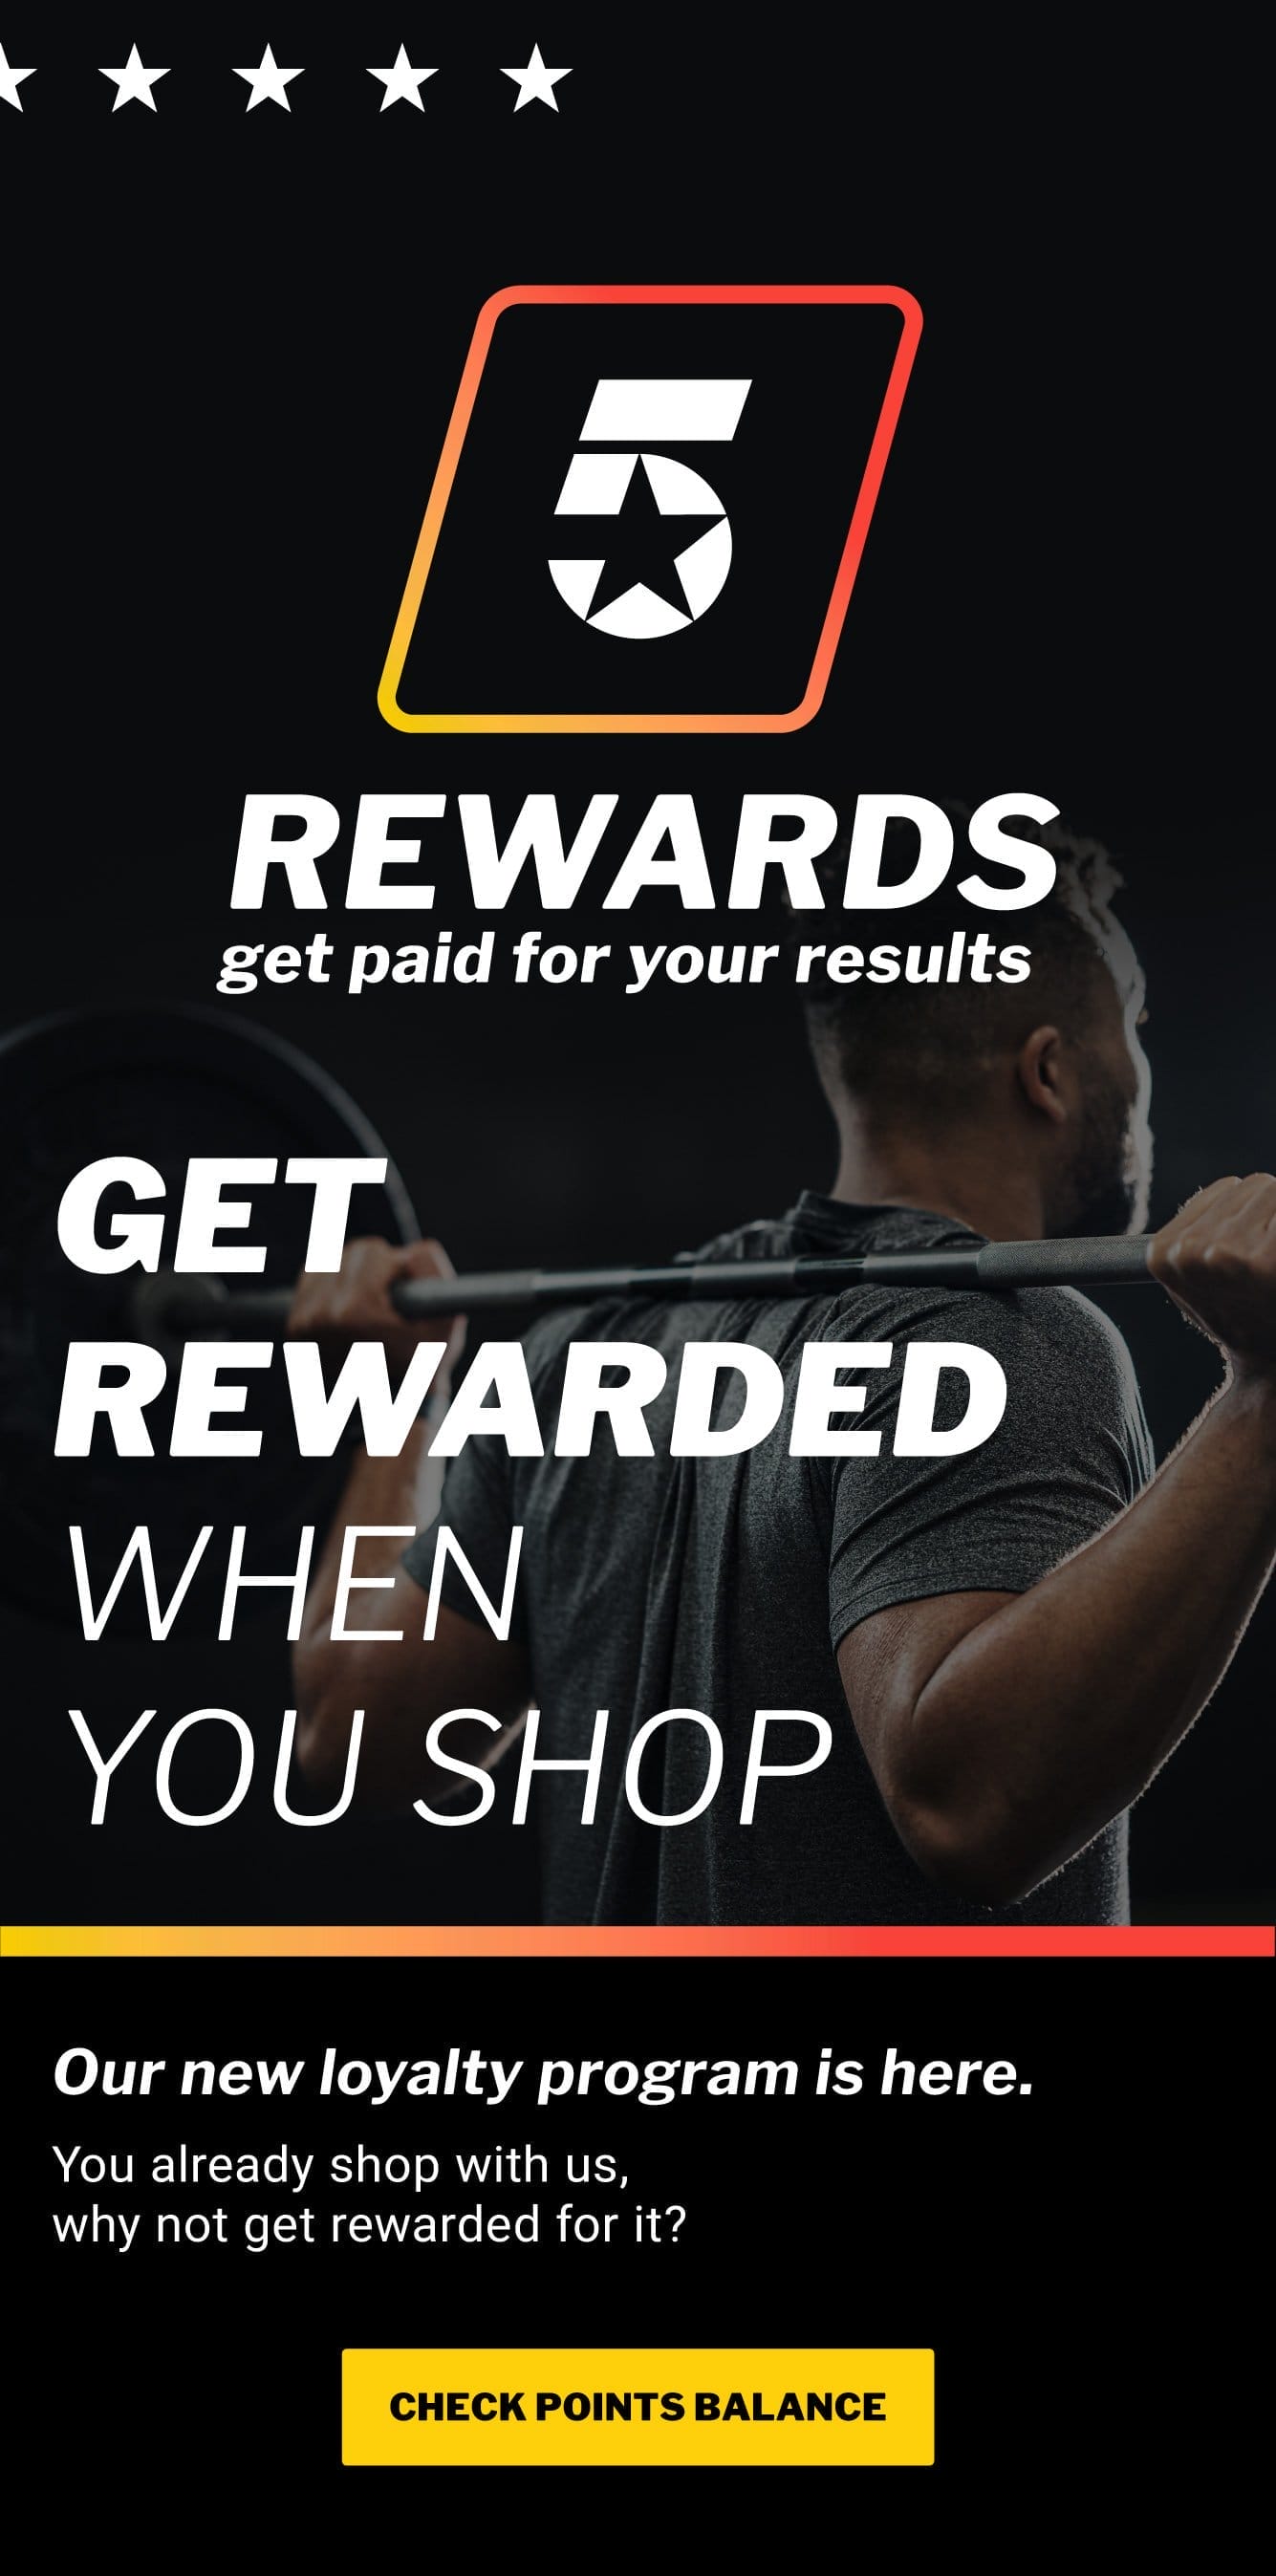 Get Rewarded when you shop. Our new loyalty program is HERE. You already shop with us, why not get rewarded for it? Check Points Balance (click image).